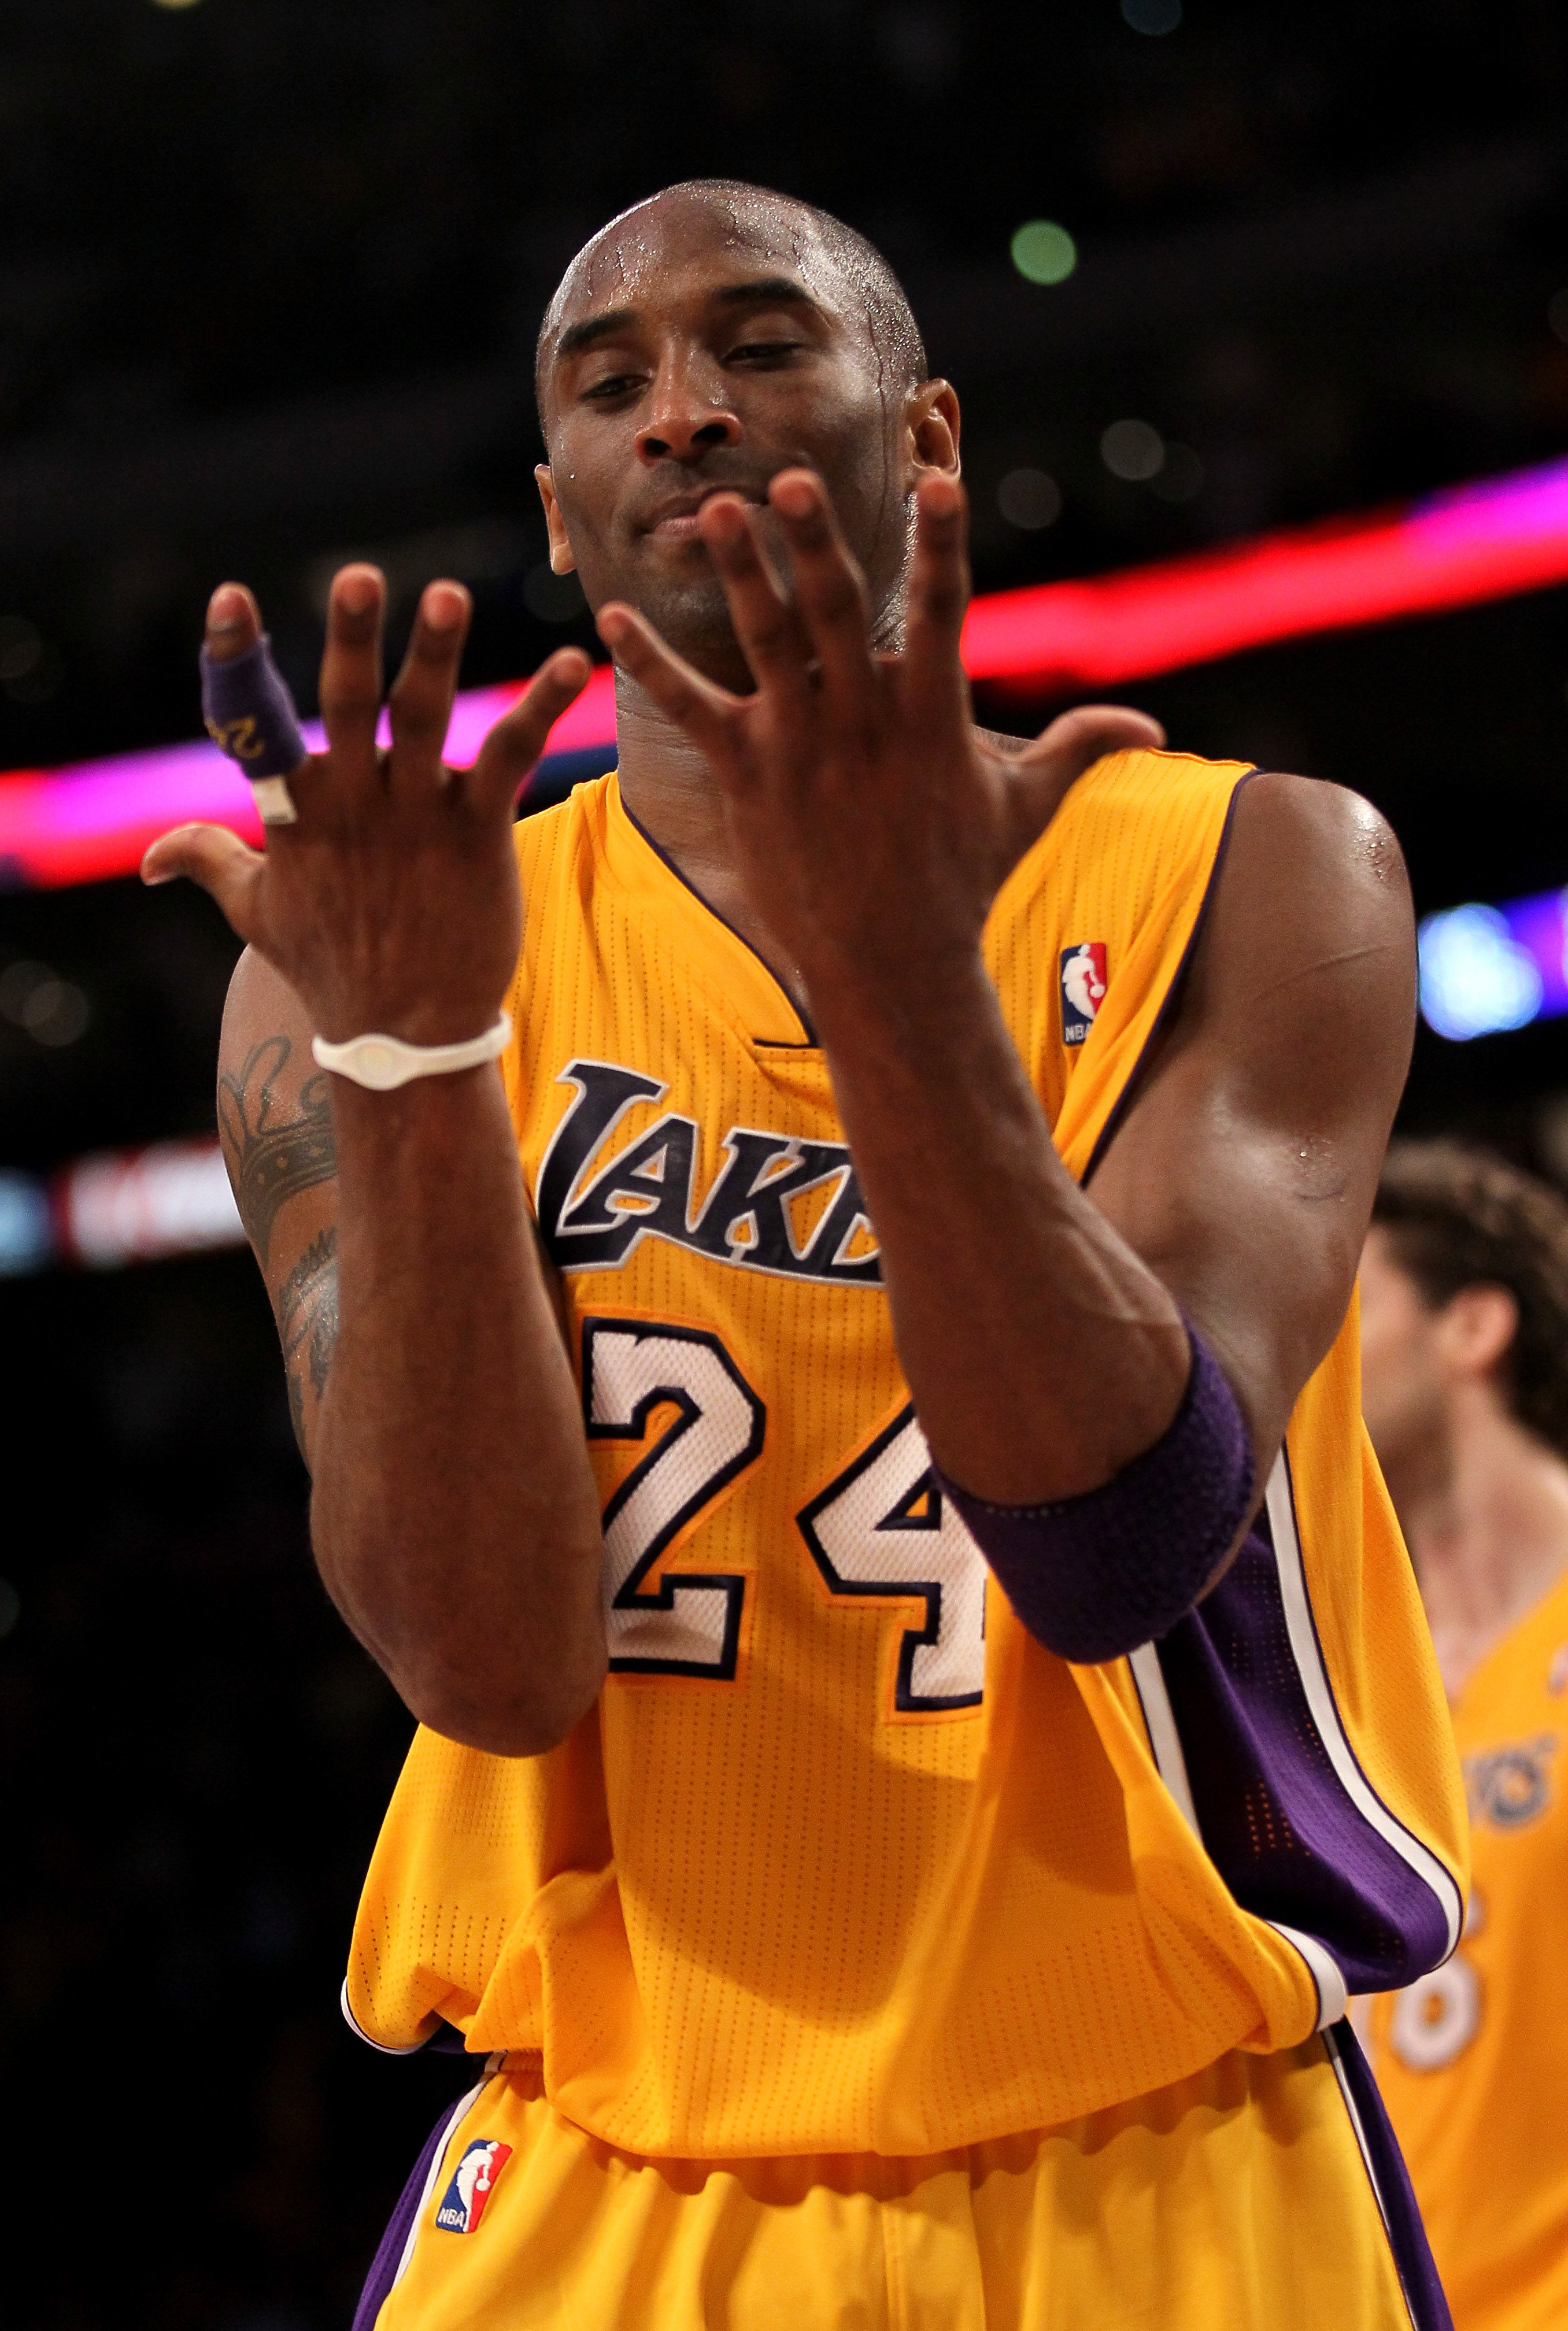 LOS ANGELES, CA - APRIL 5:  Kobe Bryant #24 of the Los Angeles Lakers looks at his hands as he walks off the court after losing control of the ball while going for the potential game winning shot in the final seconds against the Utah Jazz at Staples Cente